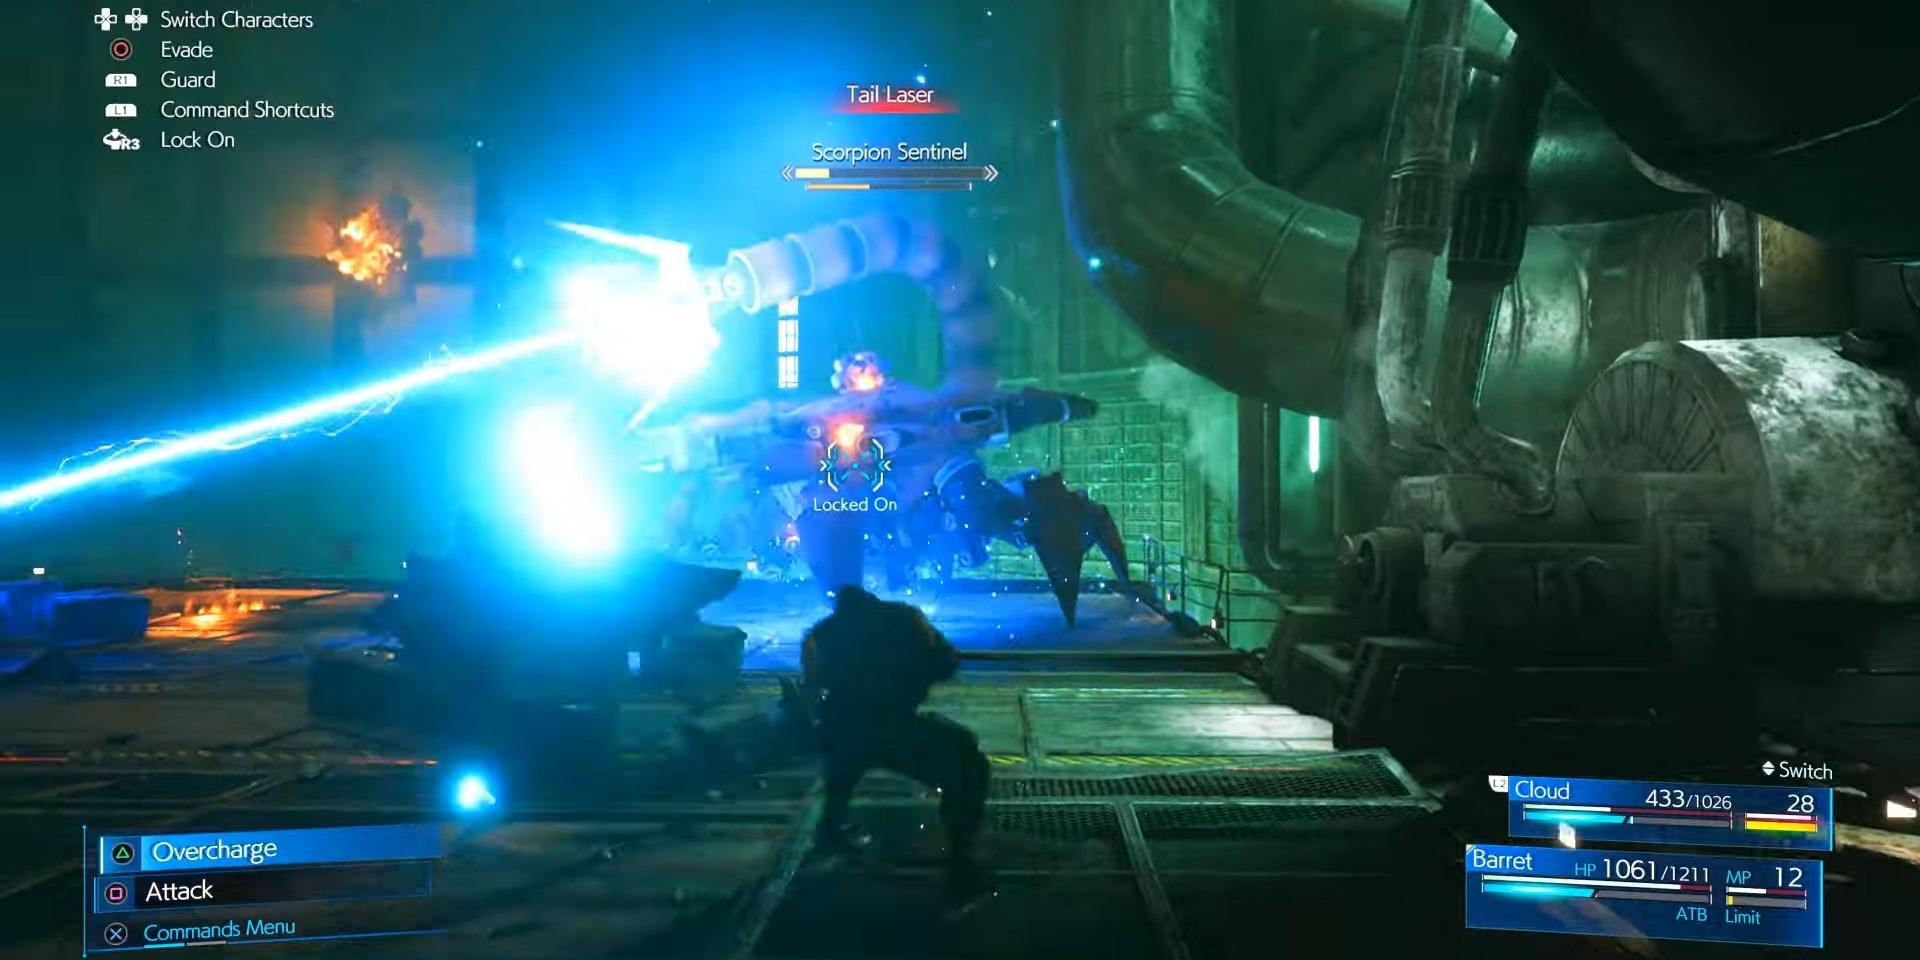 final fantasy 7 remake the scorpion sentinel using its tail laser